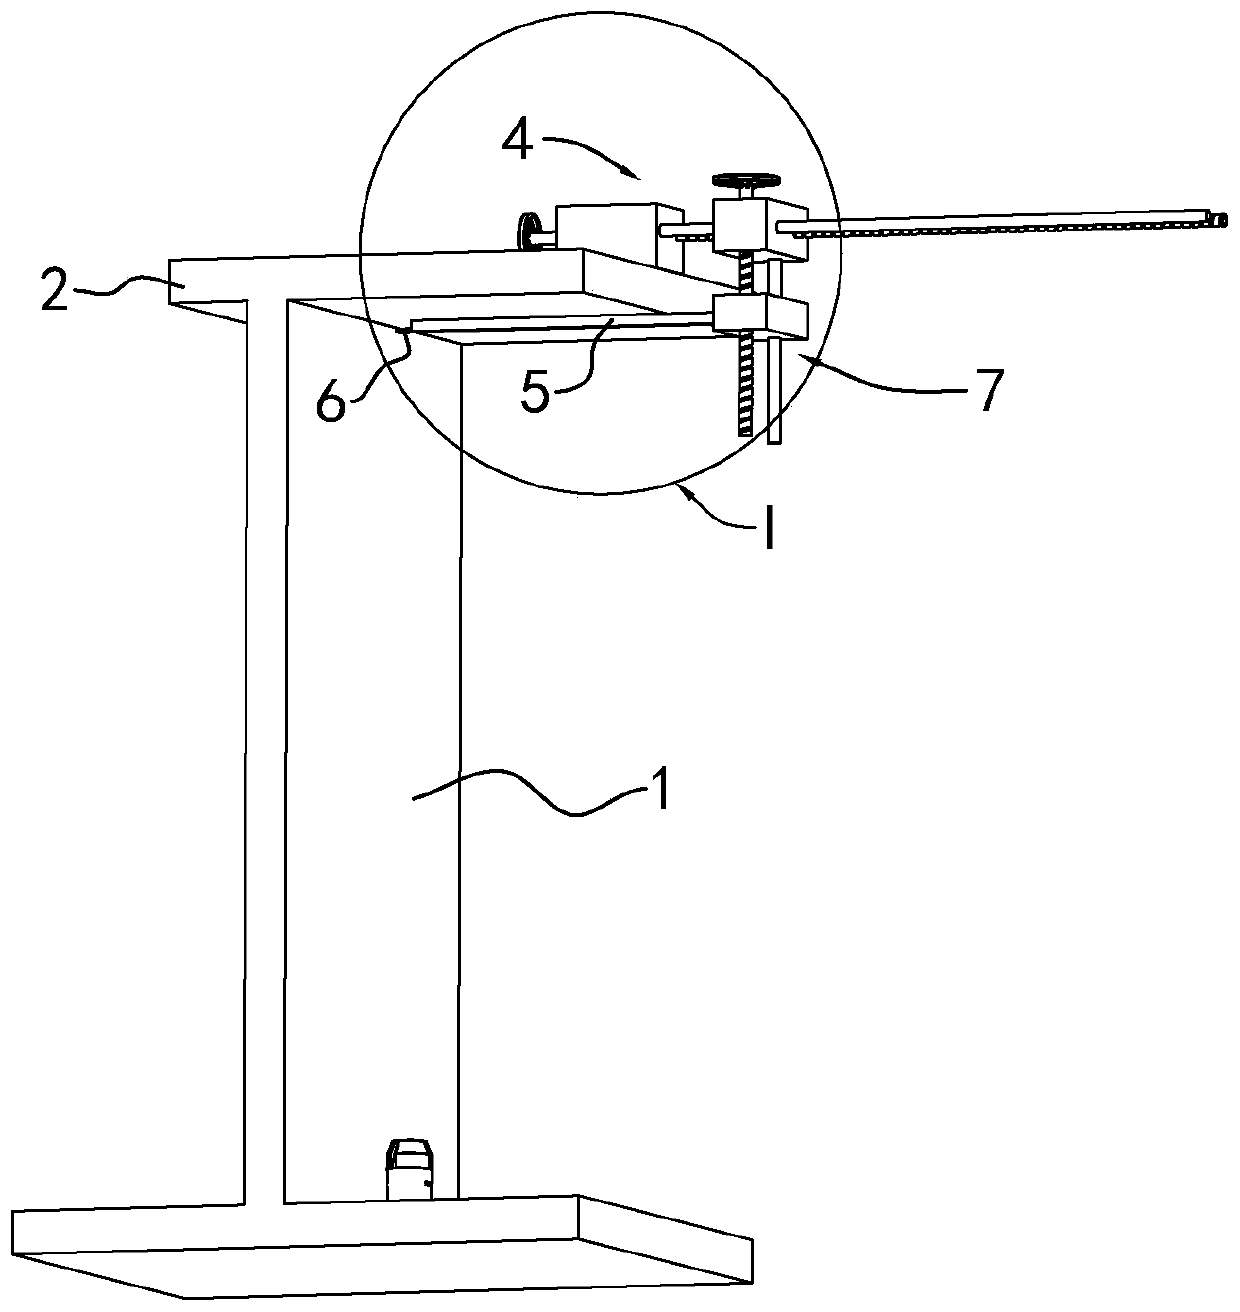 A horizontal moving device for laser testing of wall inclination